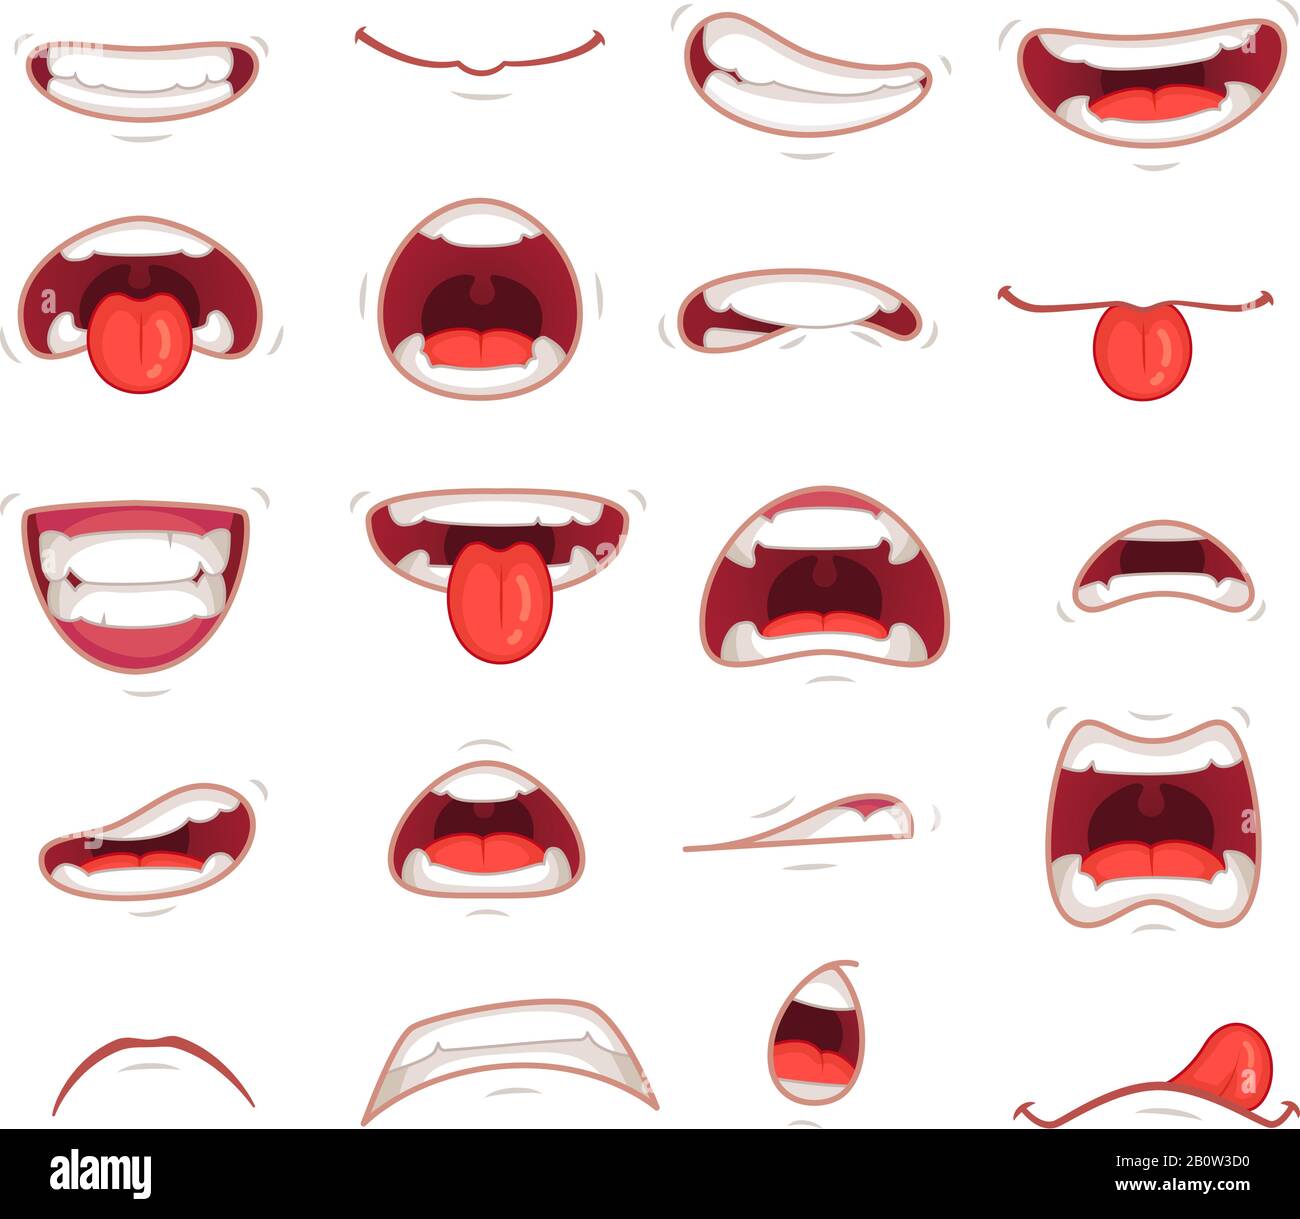 Biting lip illustration Cut Out Stock Images & Pictures - Alamy